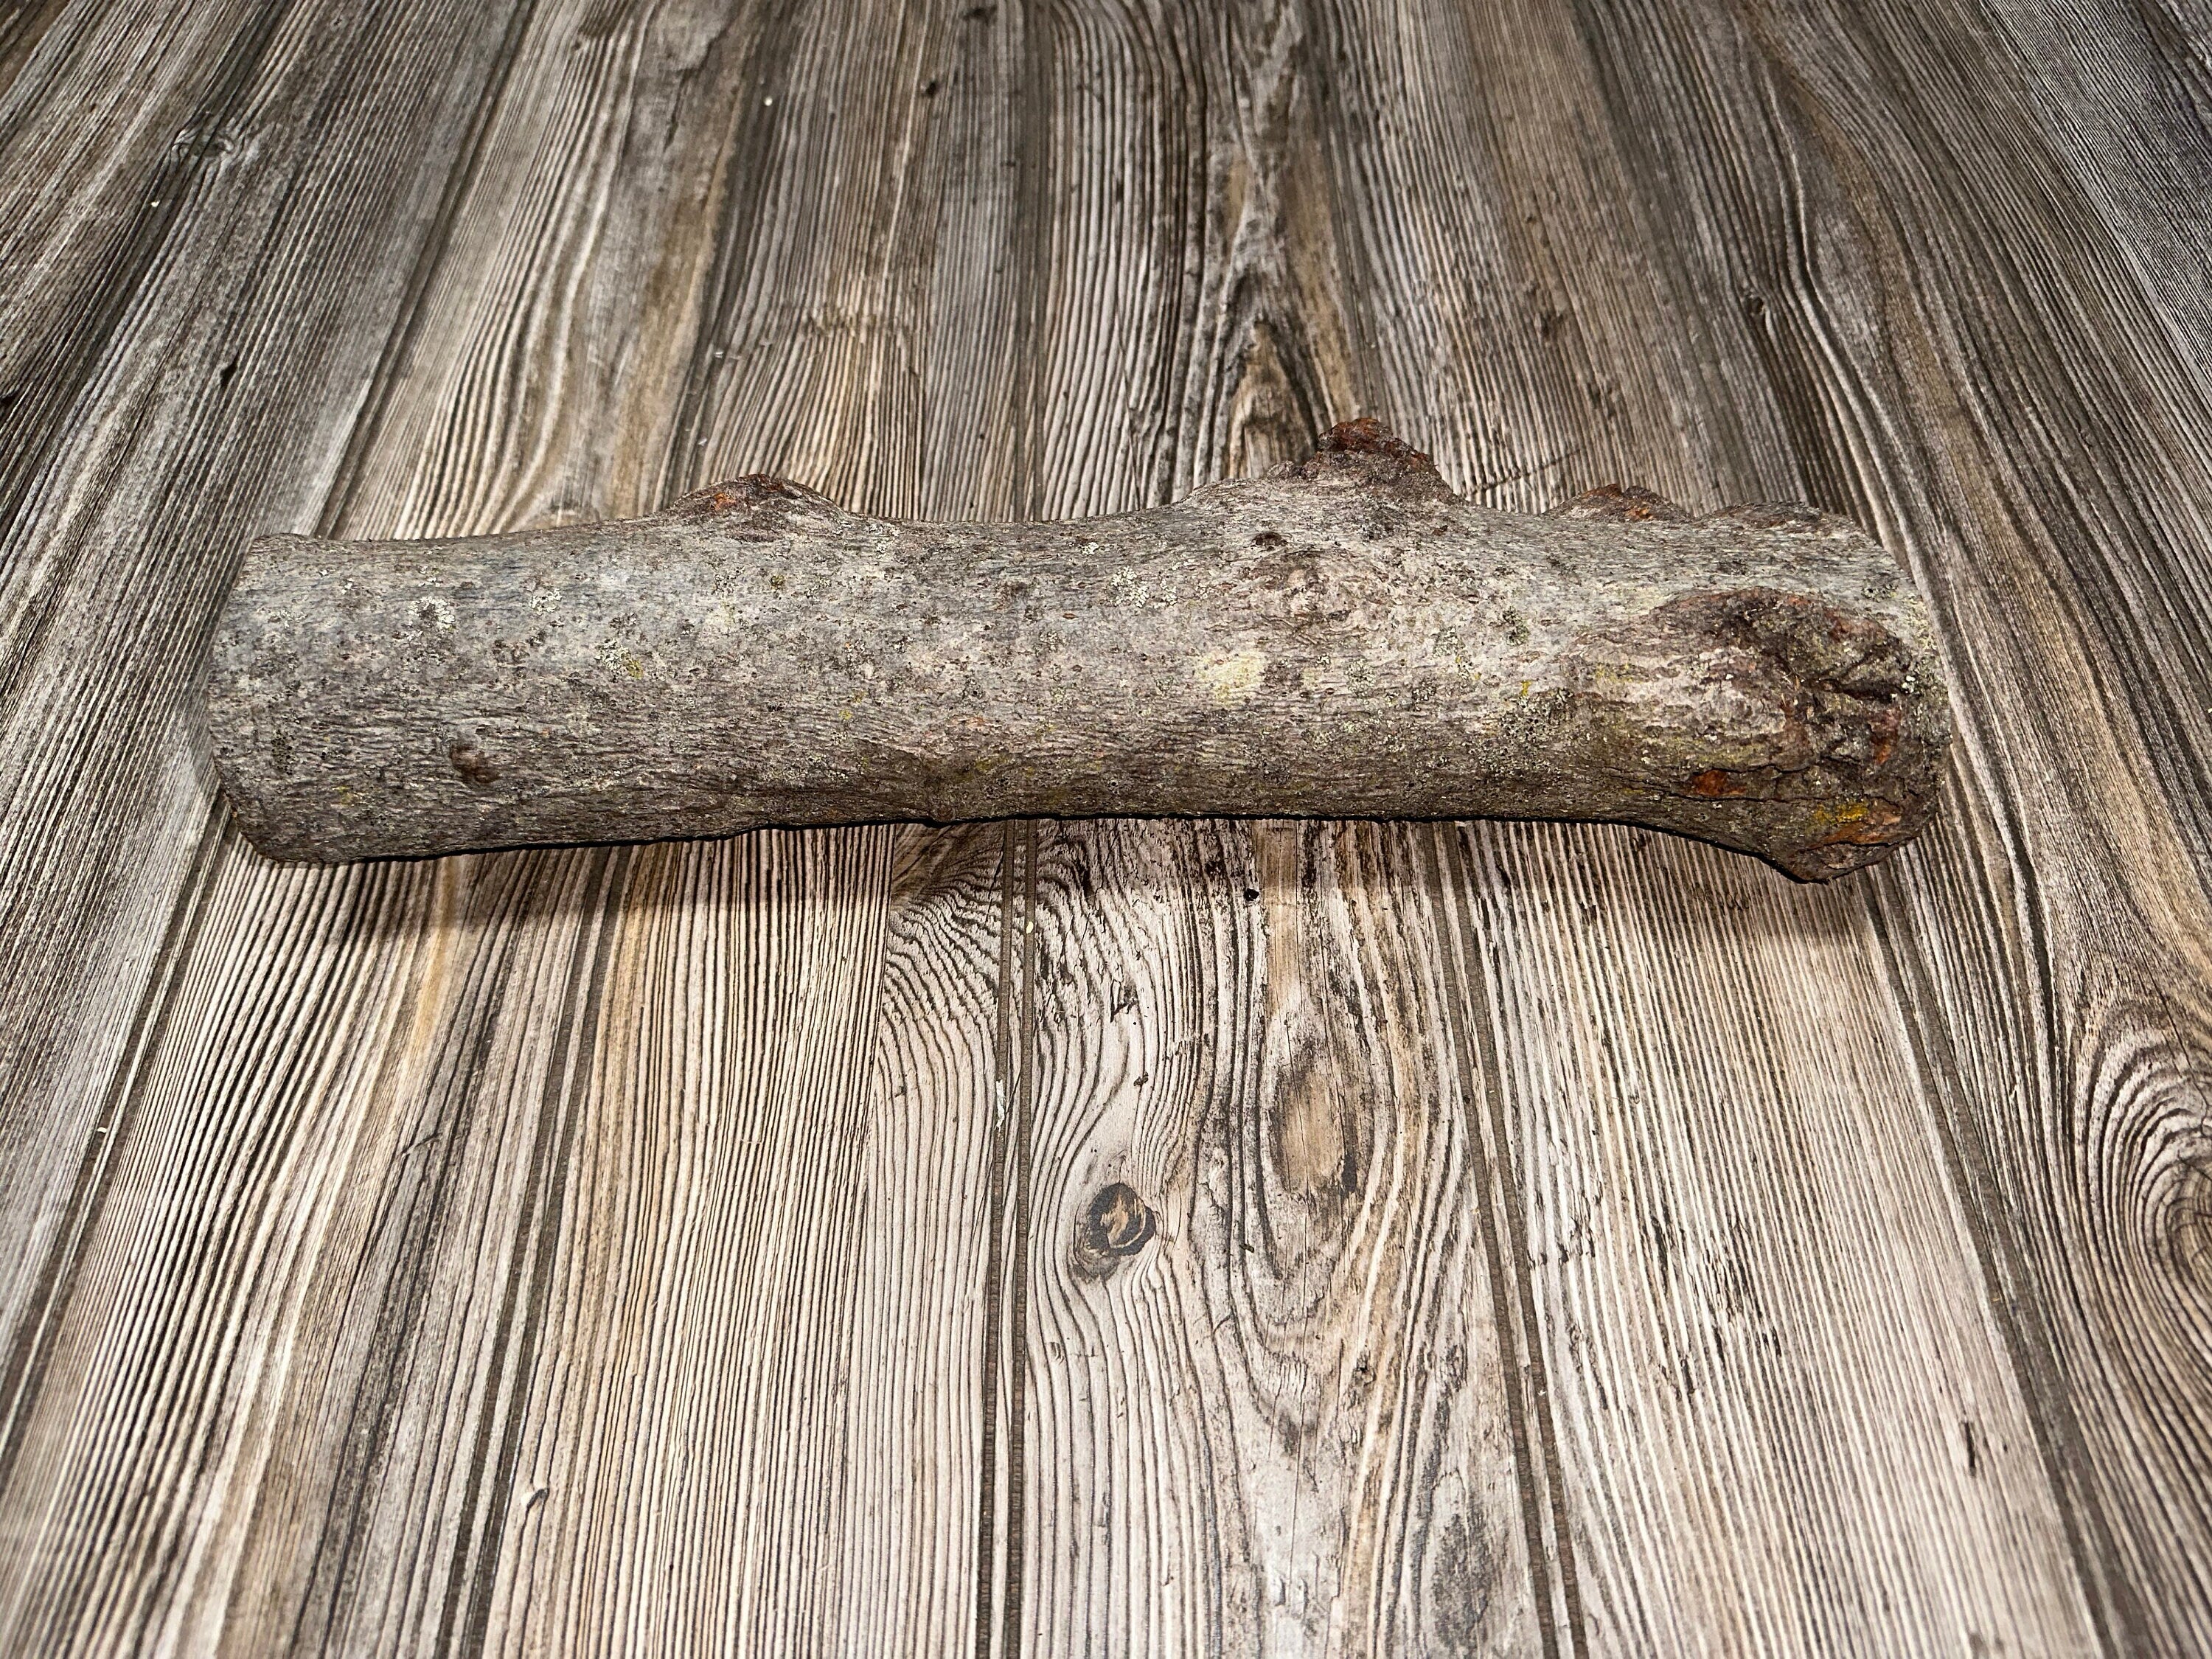 Aspen Burl Log, Approximately 14.5 Inches Long by 3 Inches Diameter